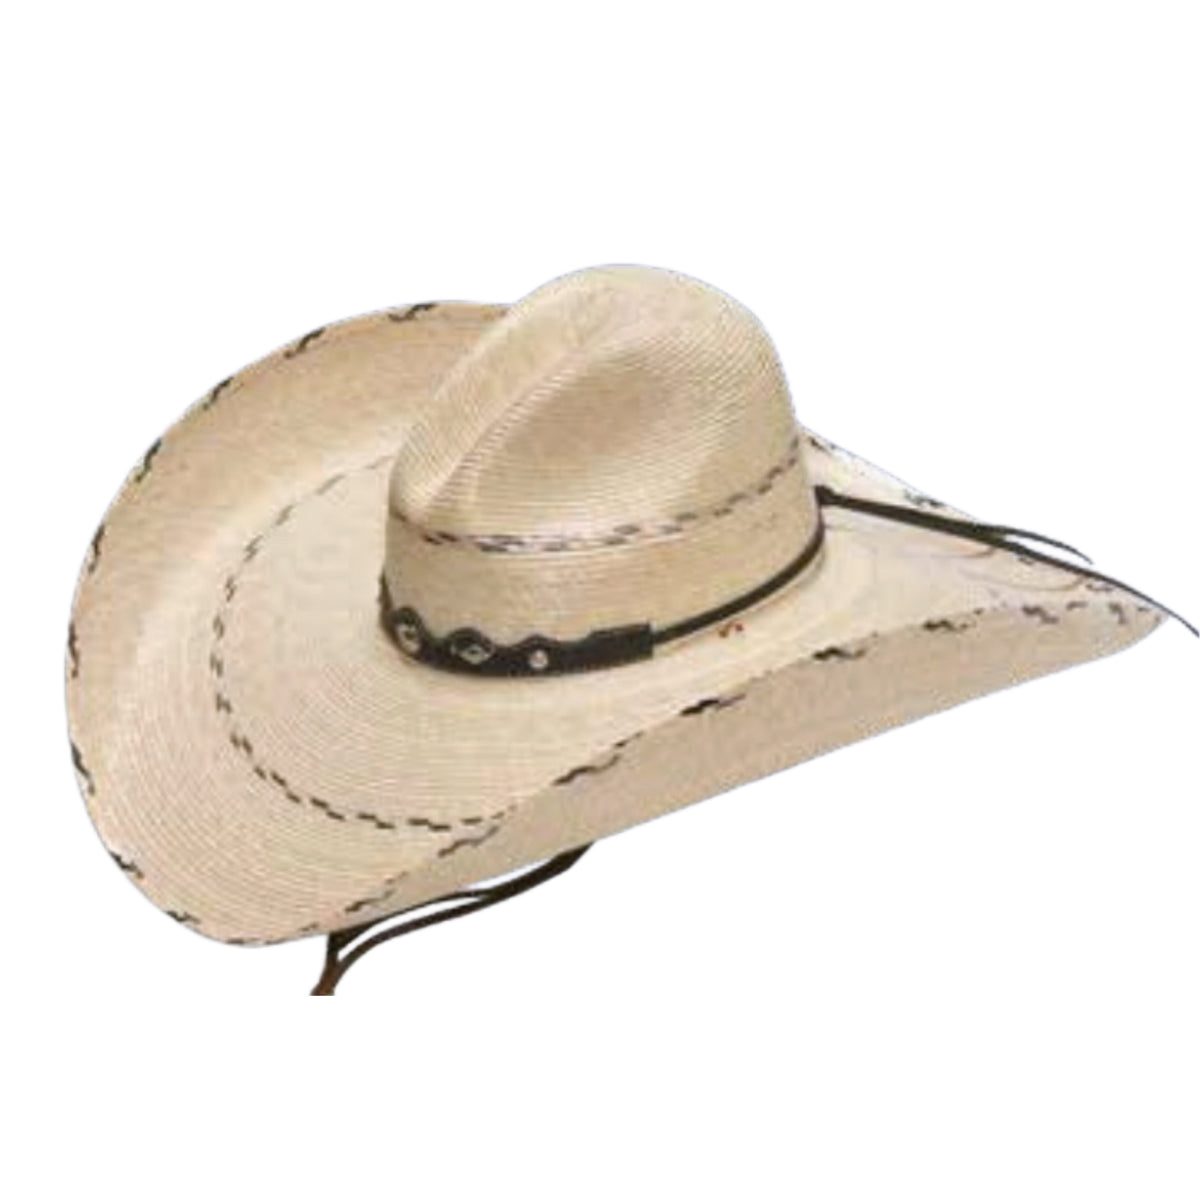 Alamo Old West Texas Python Palm Leaf Hat with Stampede Strings